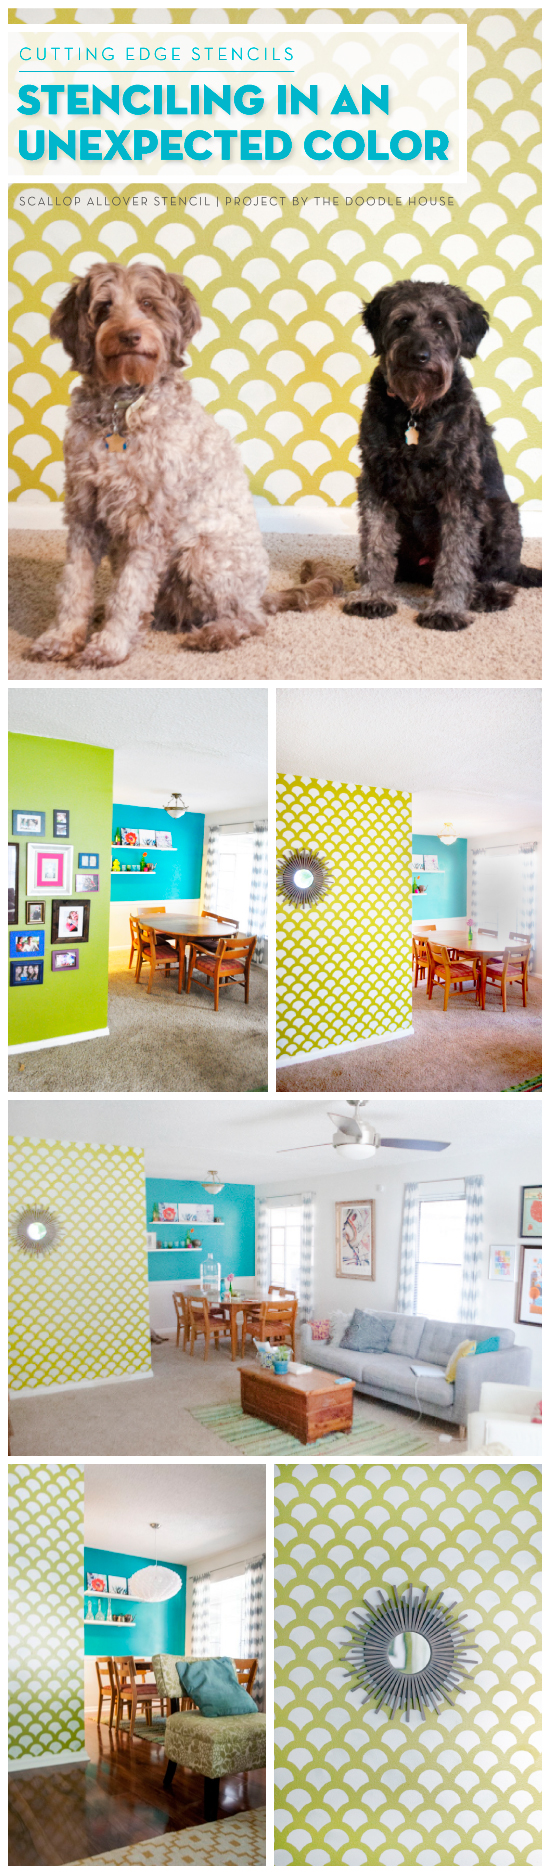 A DIY stenciled accent wall using the Scallop Allover Stencil to look like wallpaper. http://www.cuttingedgestencils.com/scallop-stencil-for-walls.html